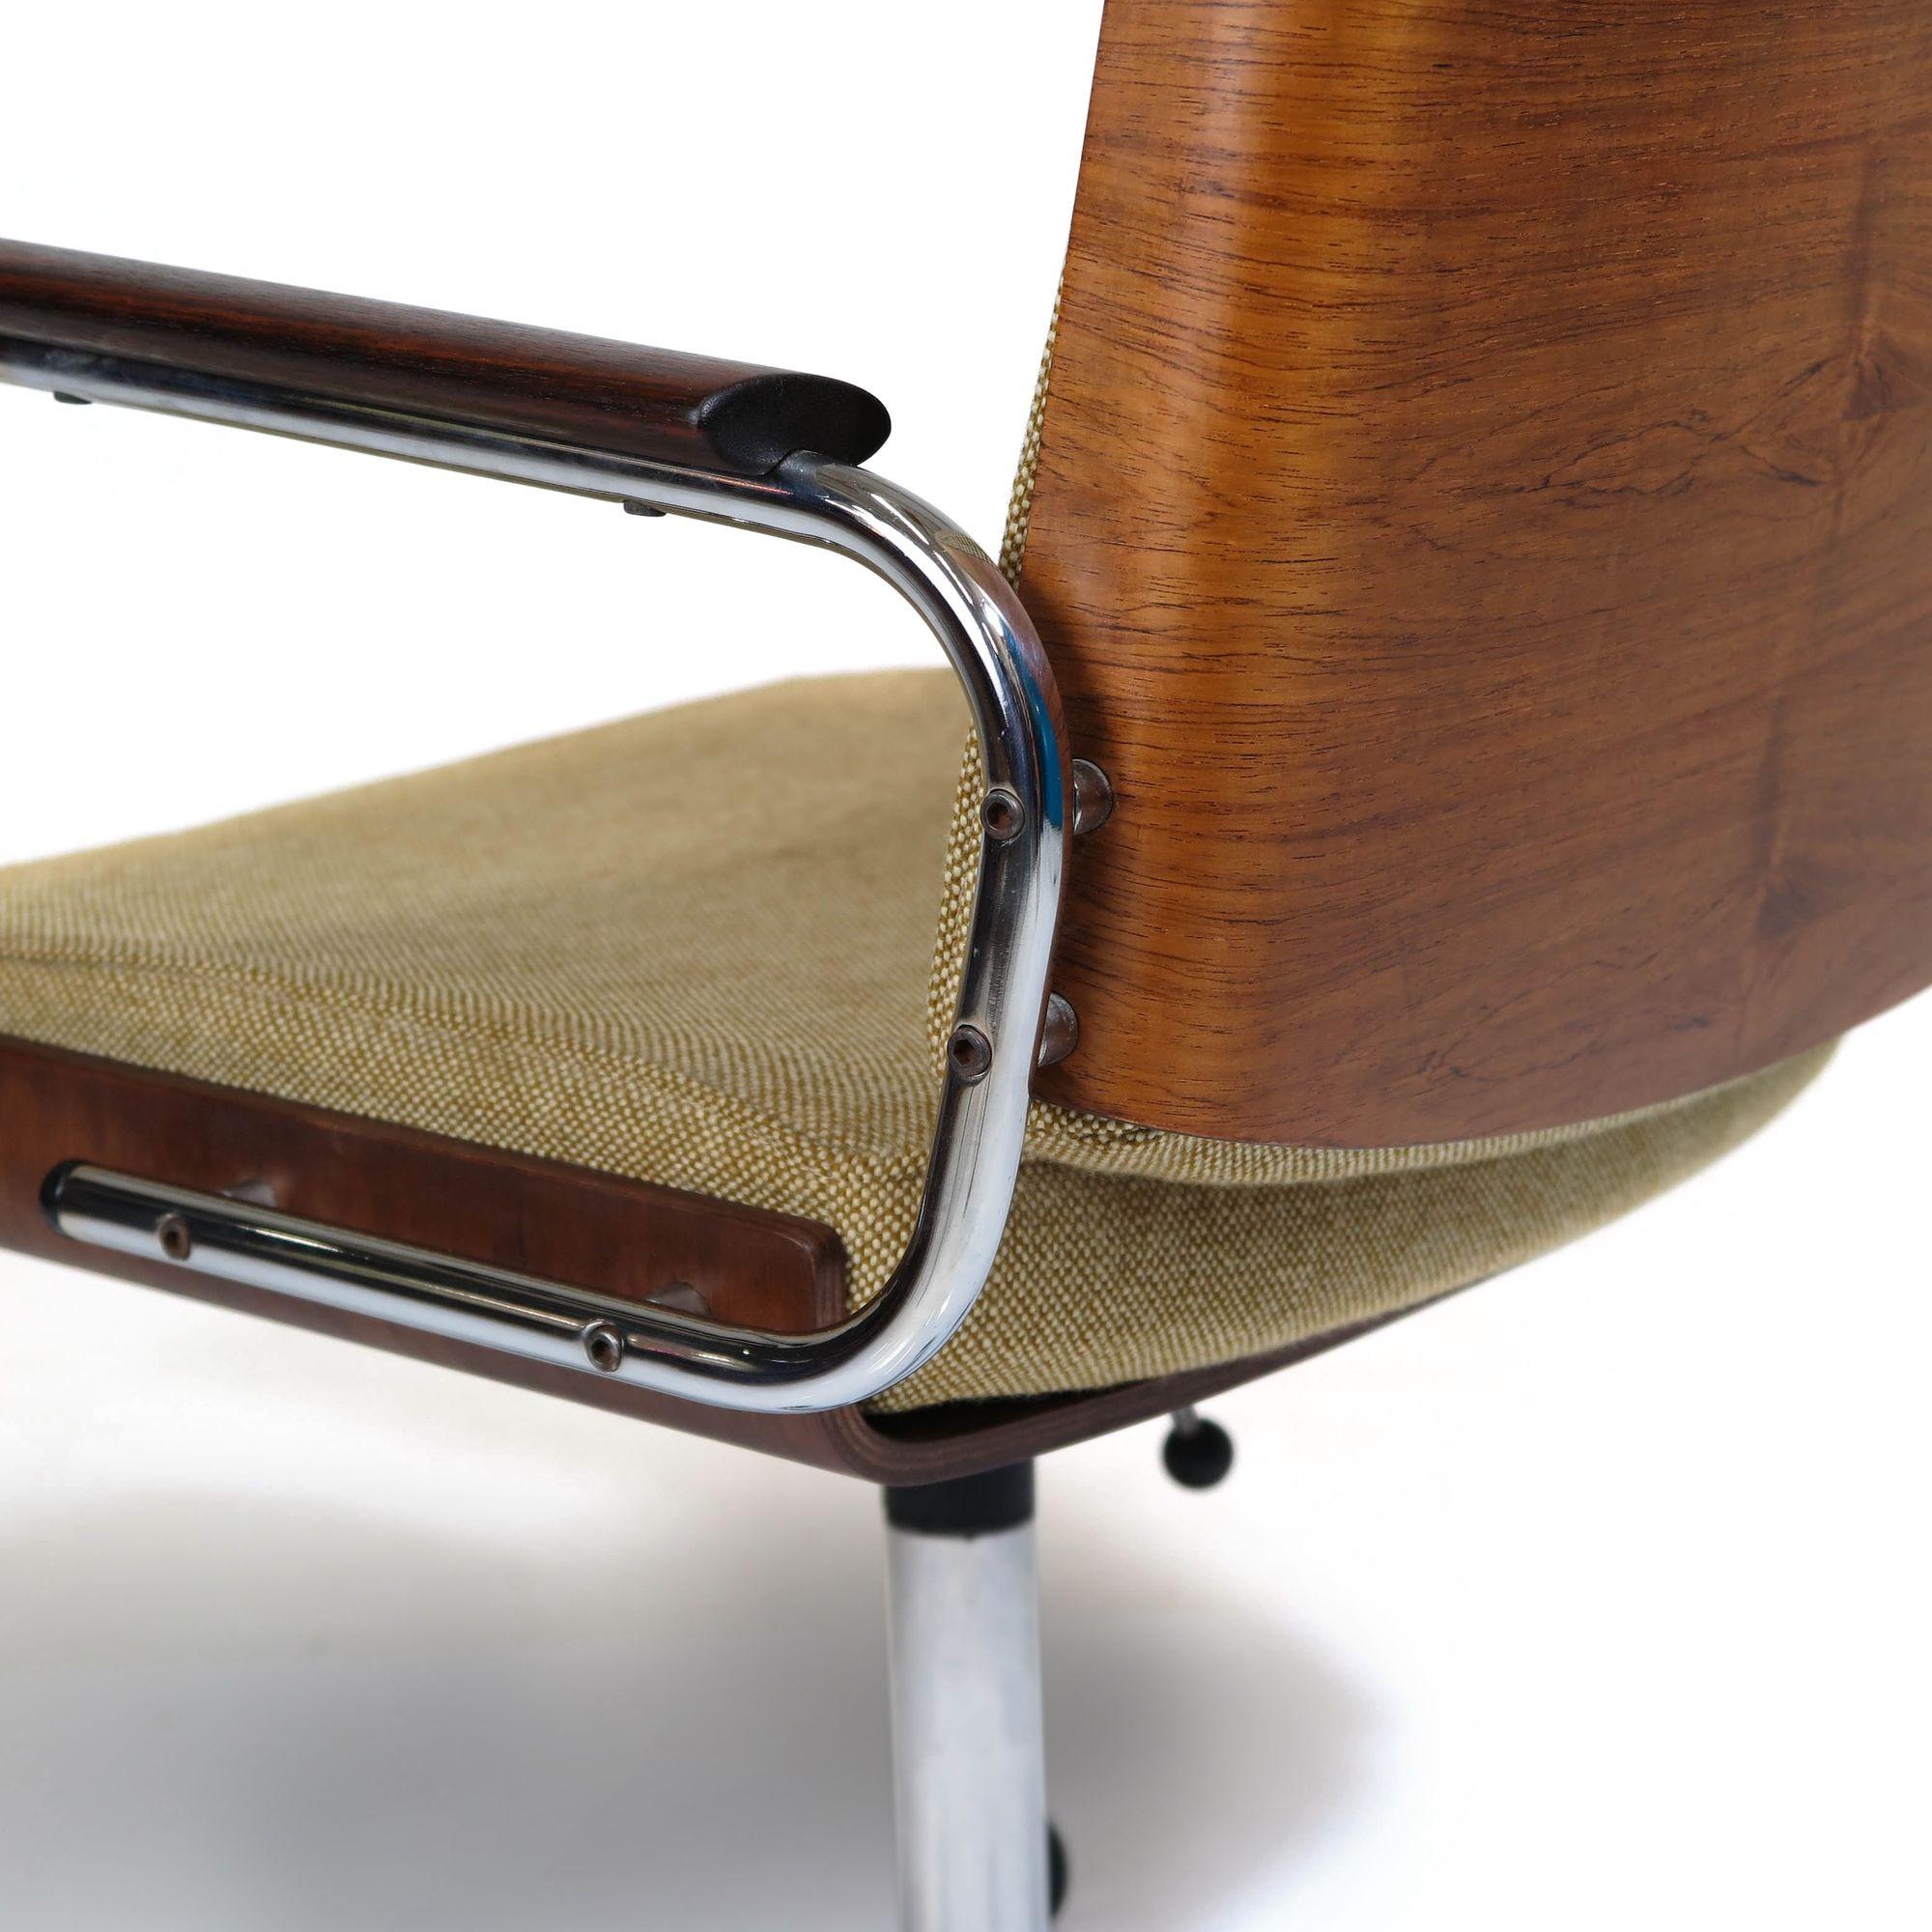 Rosewood and aluminum office or dining chairs with floating solid rosewood arm rests, and recessed cushions upholstered in the original wool. The seats and backrests are crafted of steamed Rosewood plywood. The solid rosewood armrests are supported